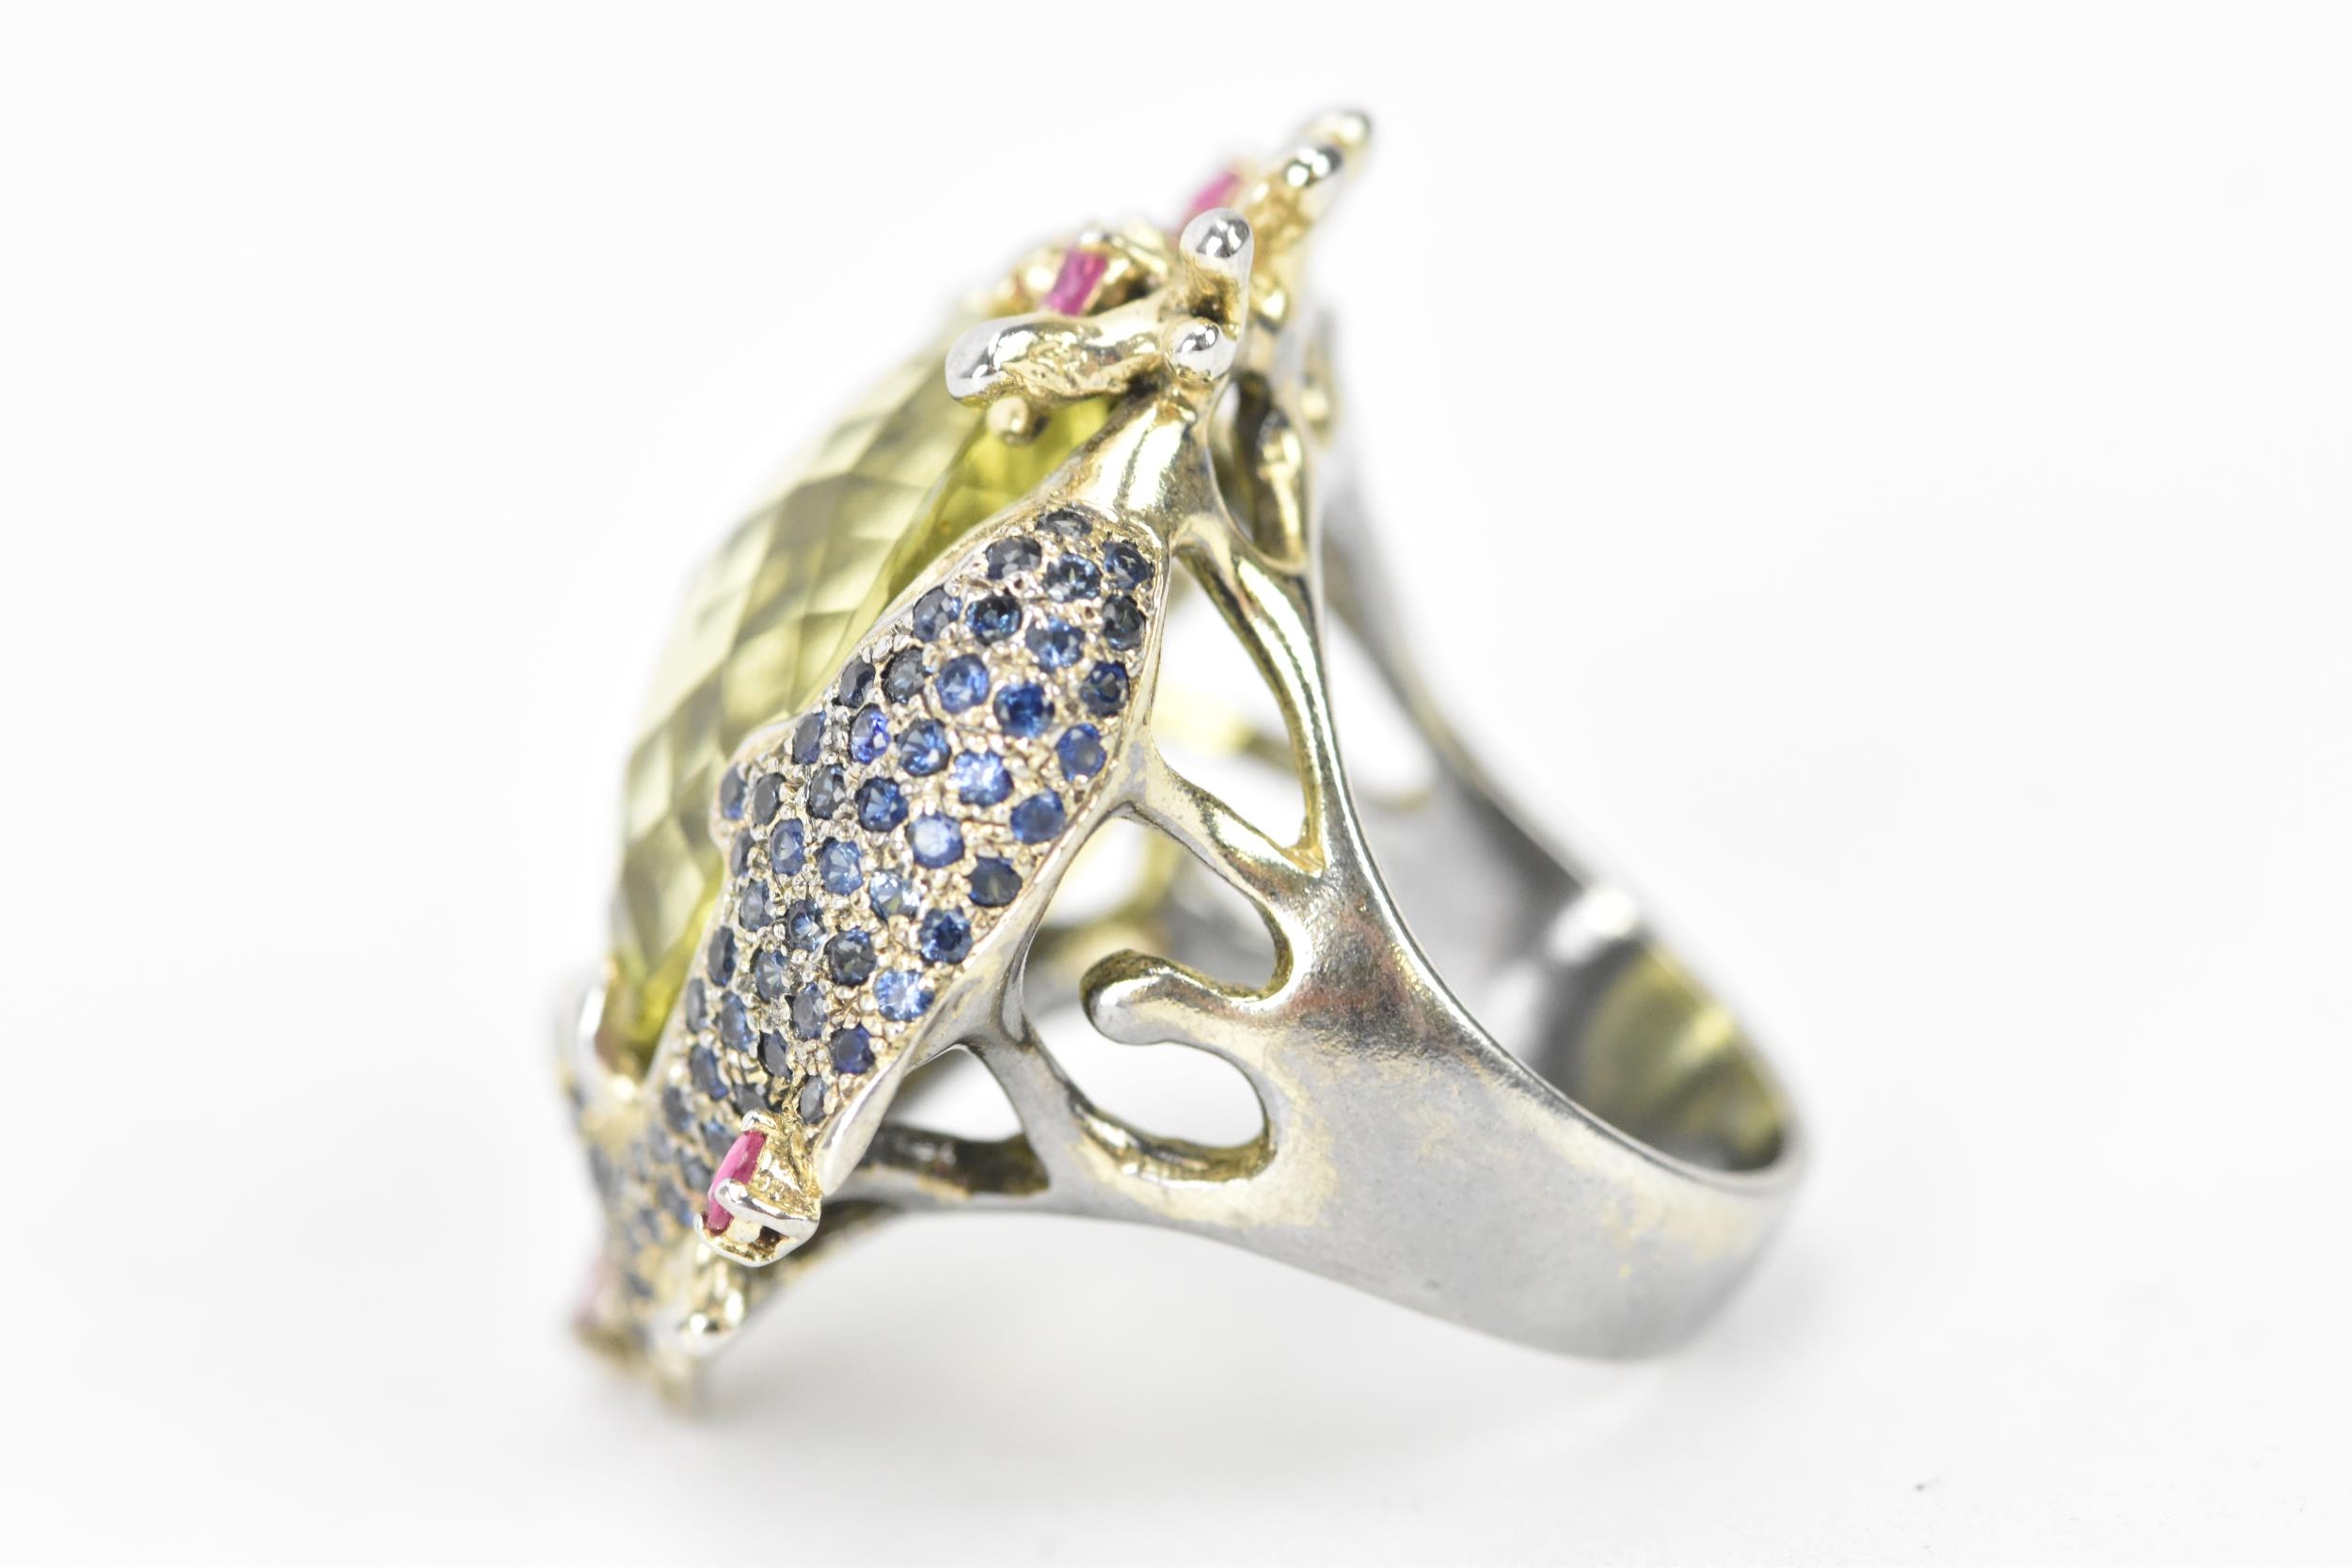 A silver dress ring inset with a large lemon quartz to the centre, decorated with a dolphin and - Image 2 of 3